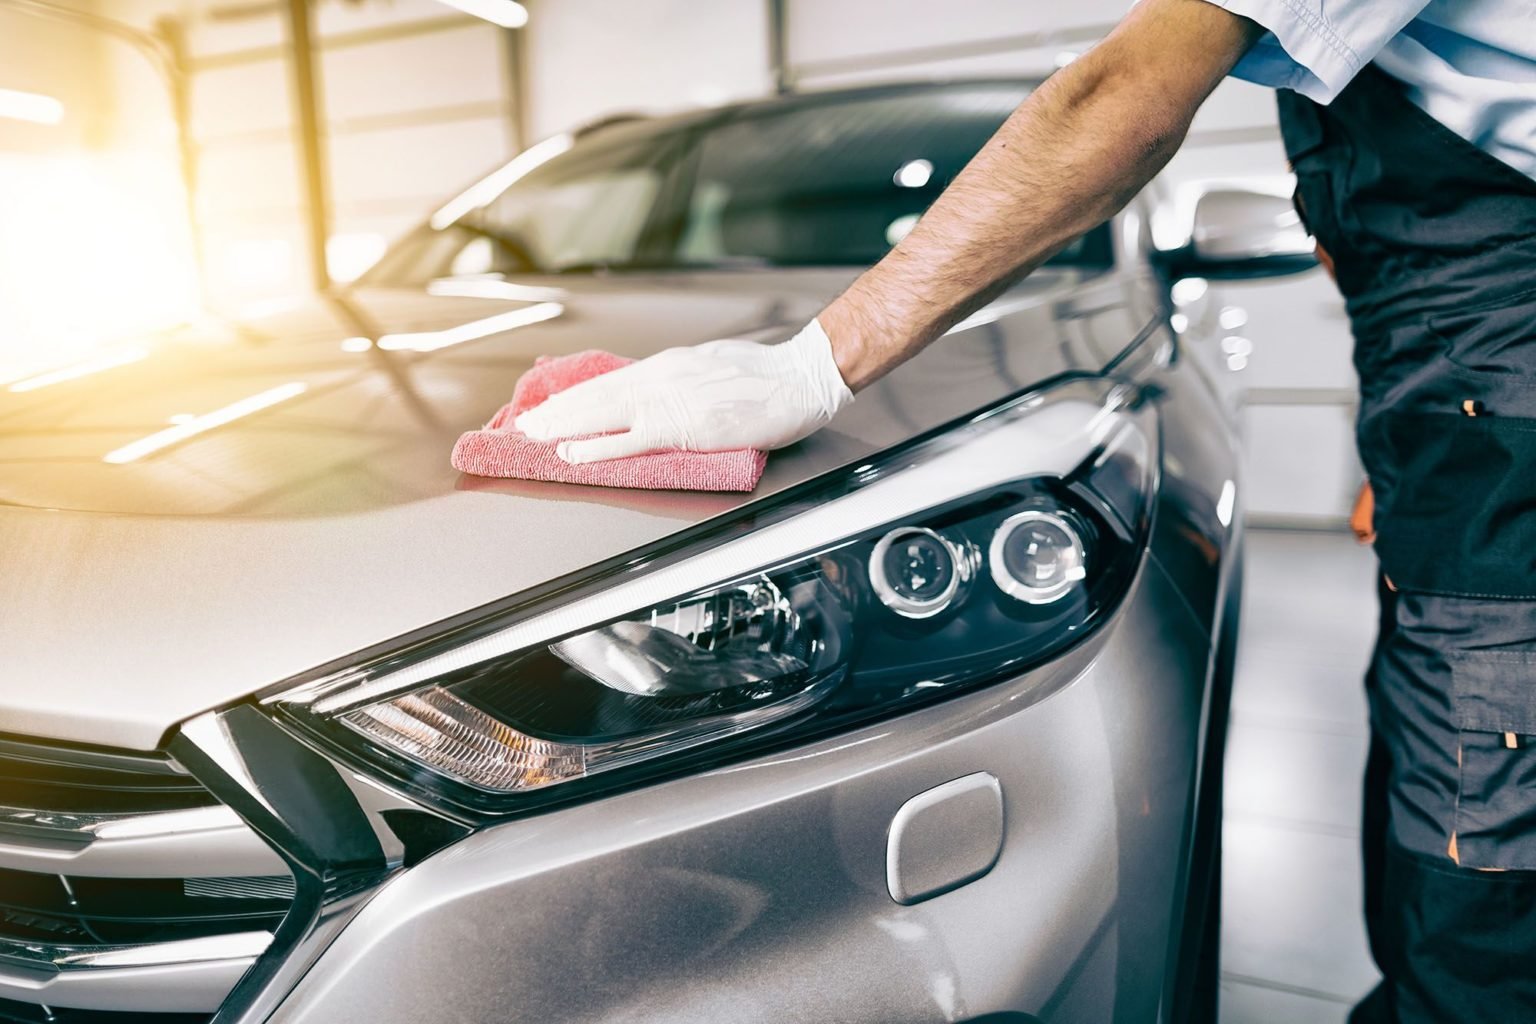 Why Should You Choose an Automated Car Wash Over a Hand Wash?